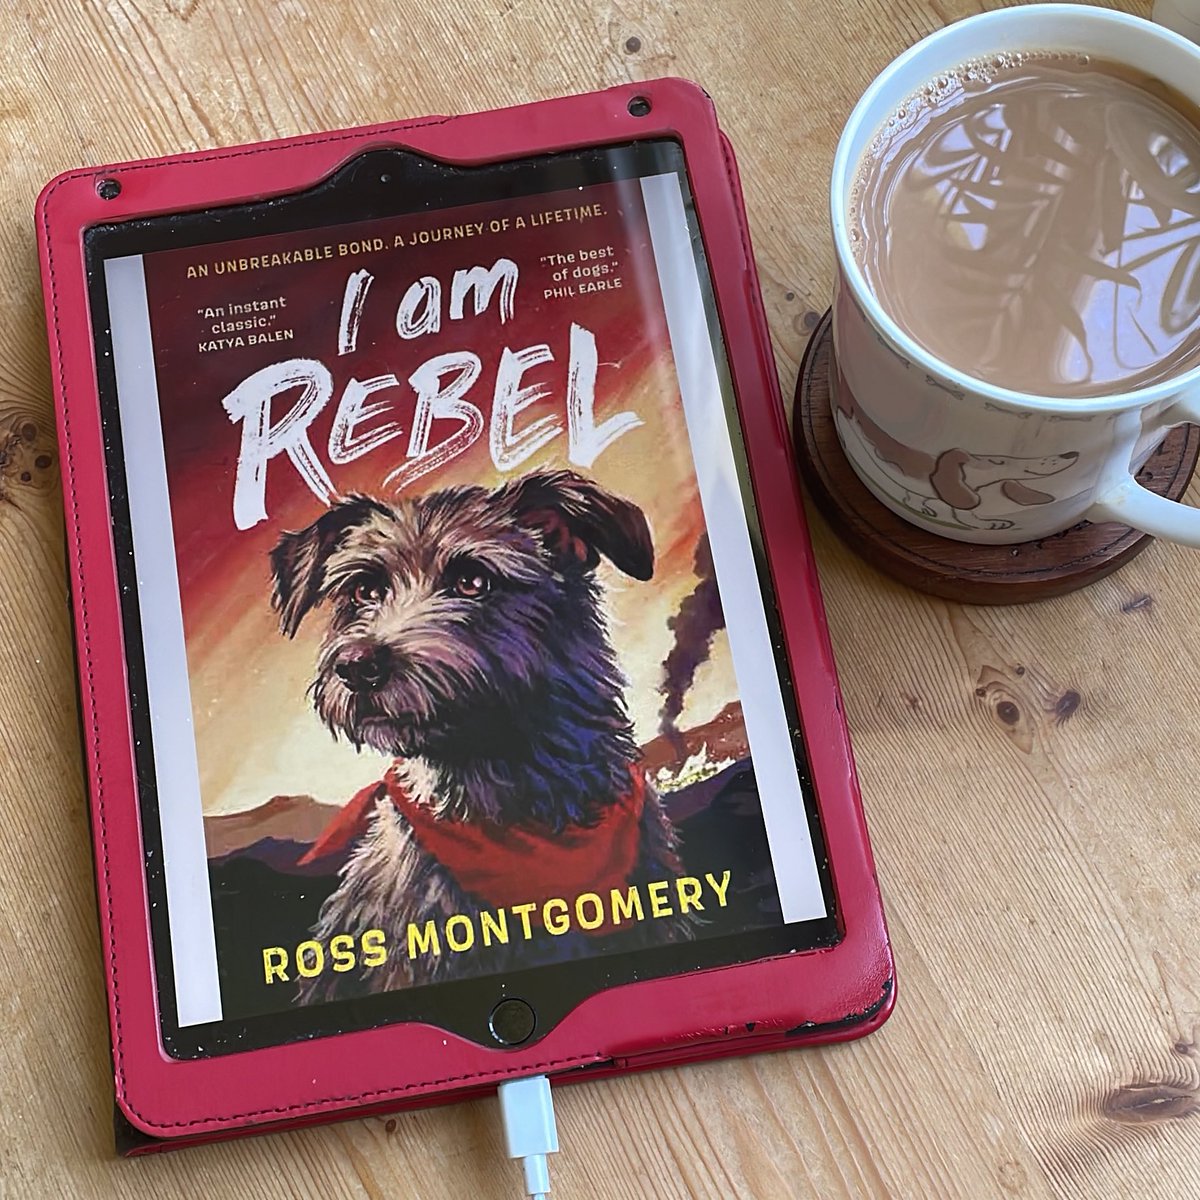 Anyone else’s reading plans suddenly changed this afternoon? #IAmRebel #NetGalley @mossmontmomery @WalkerBooksUK